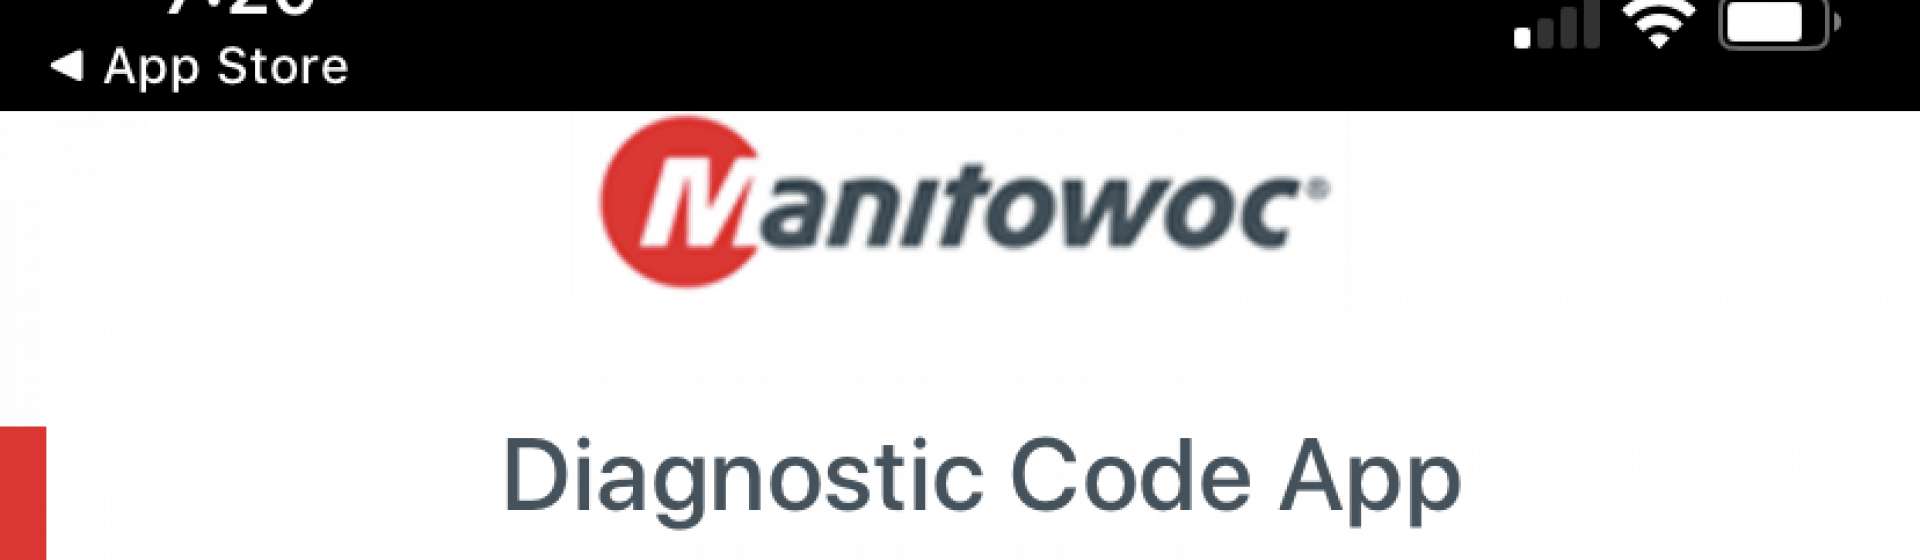 Manitowoc-updates-its-free-diagnostic-mobile-app-to-include-Potain-tower-cranes-releases-new-Bluetooth-enabled-pressure-test-kit-03.png